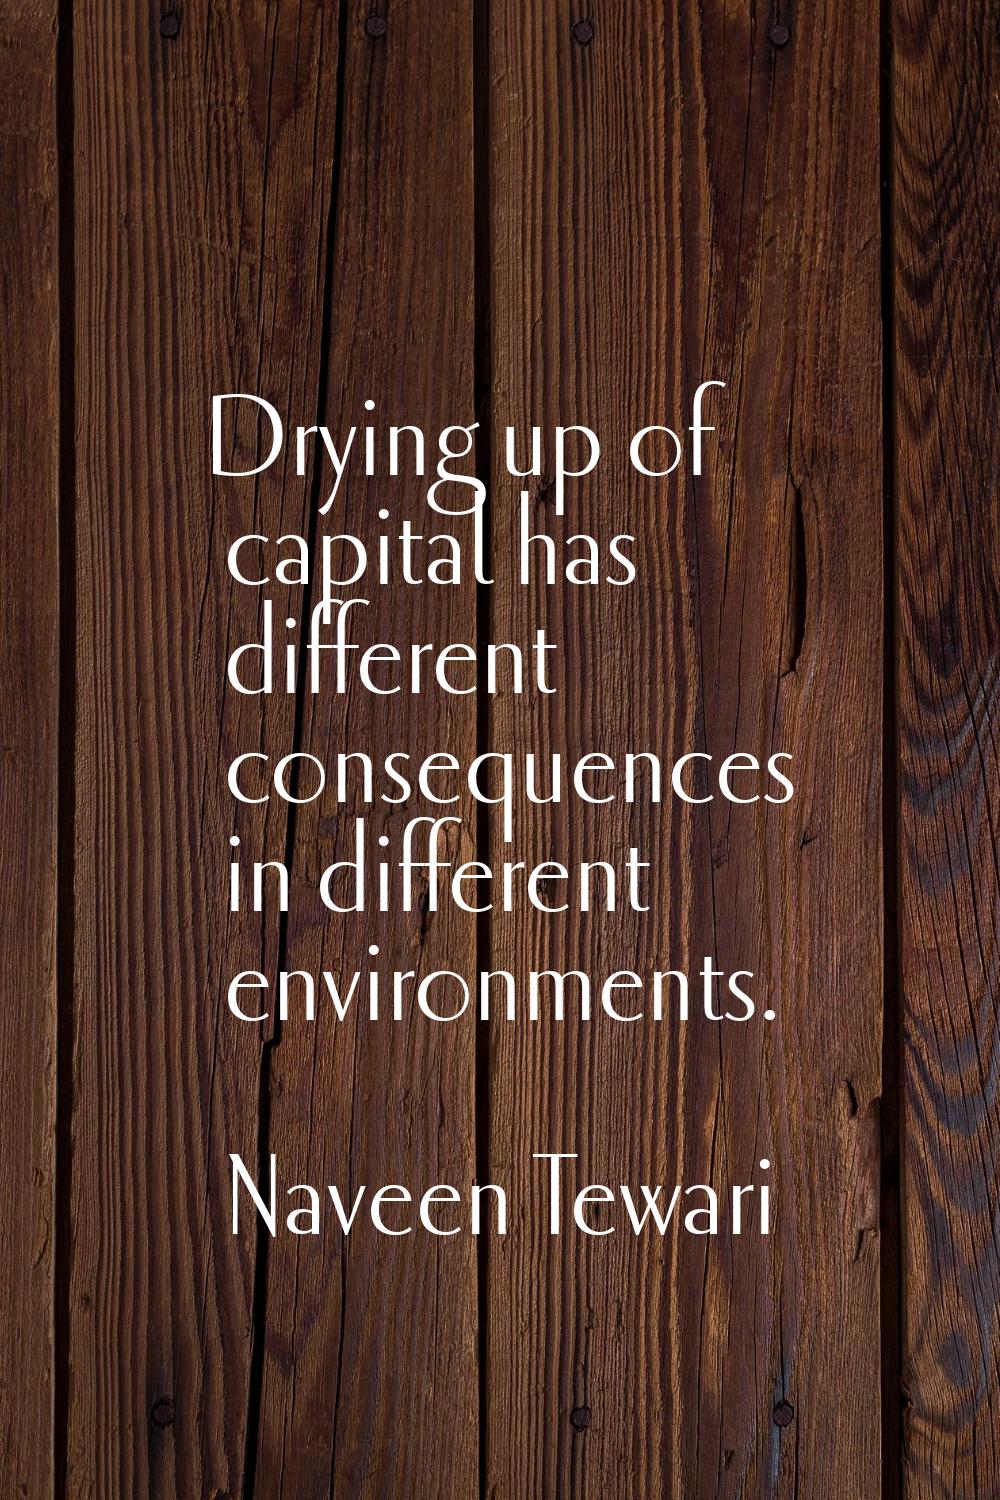 Drying up of capital has different consequences in different environments.